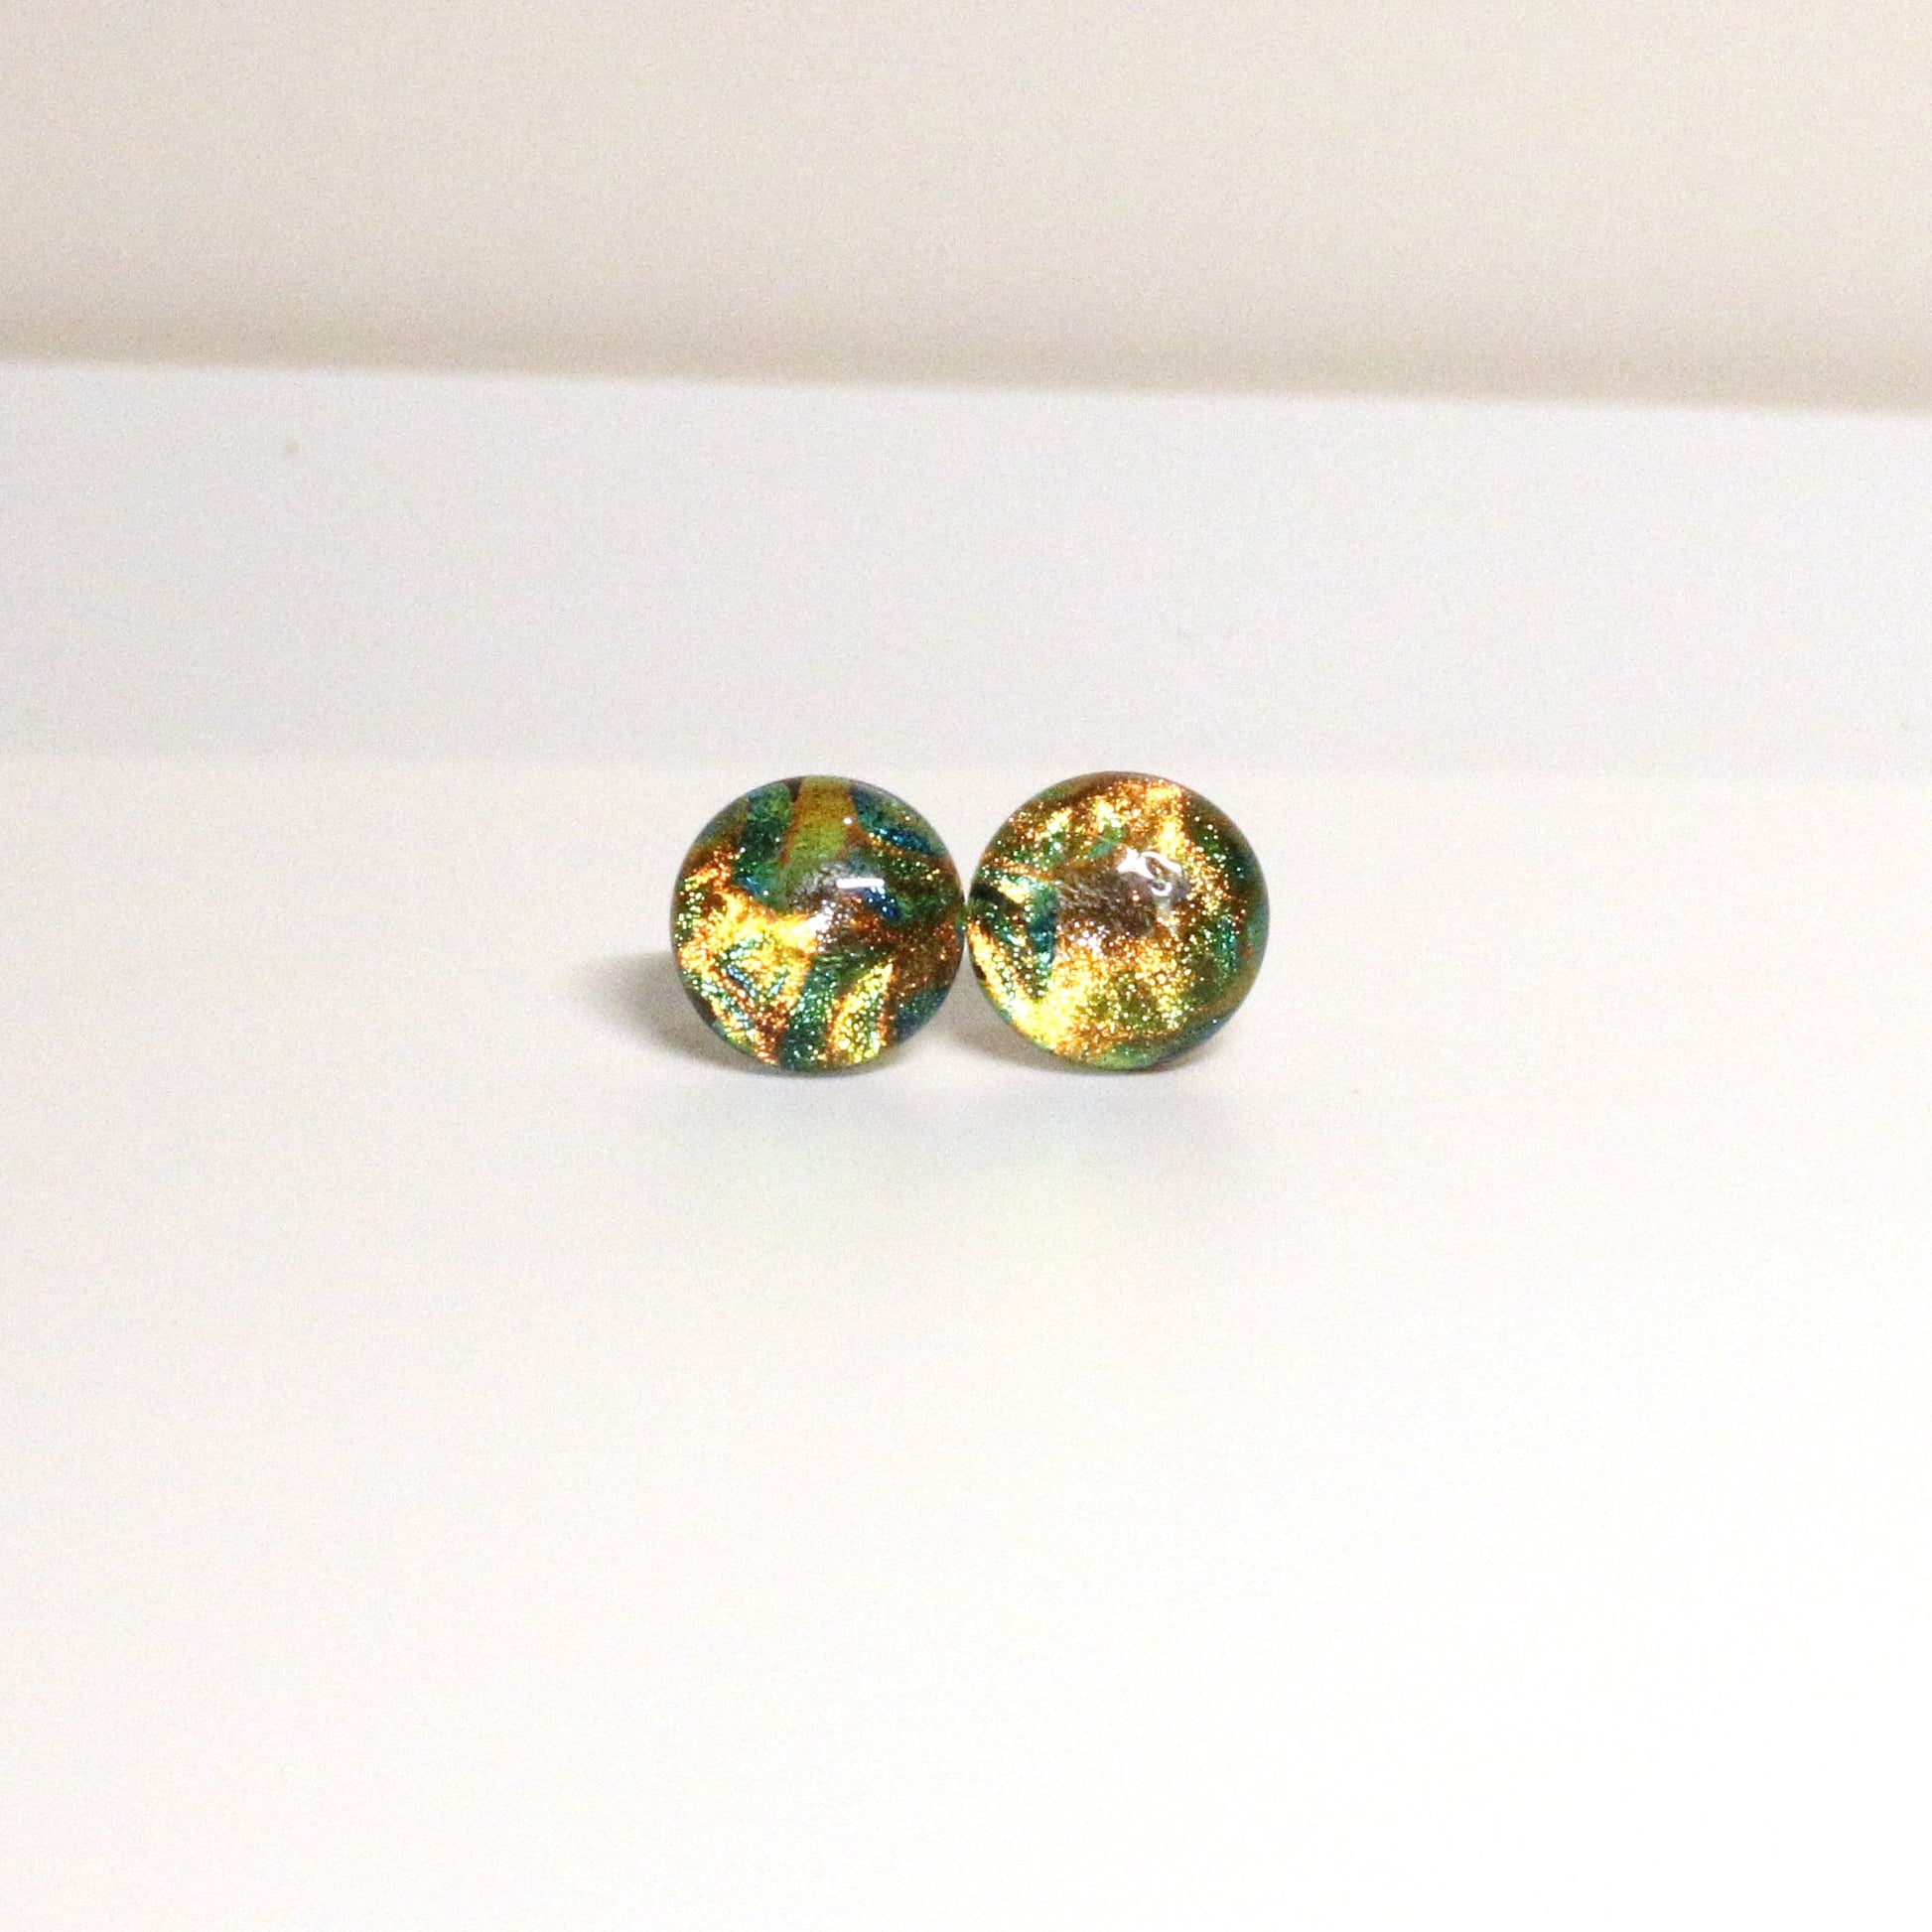 Dichroic Fused Glass Earring Studs - 3830